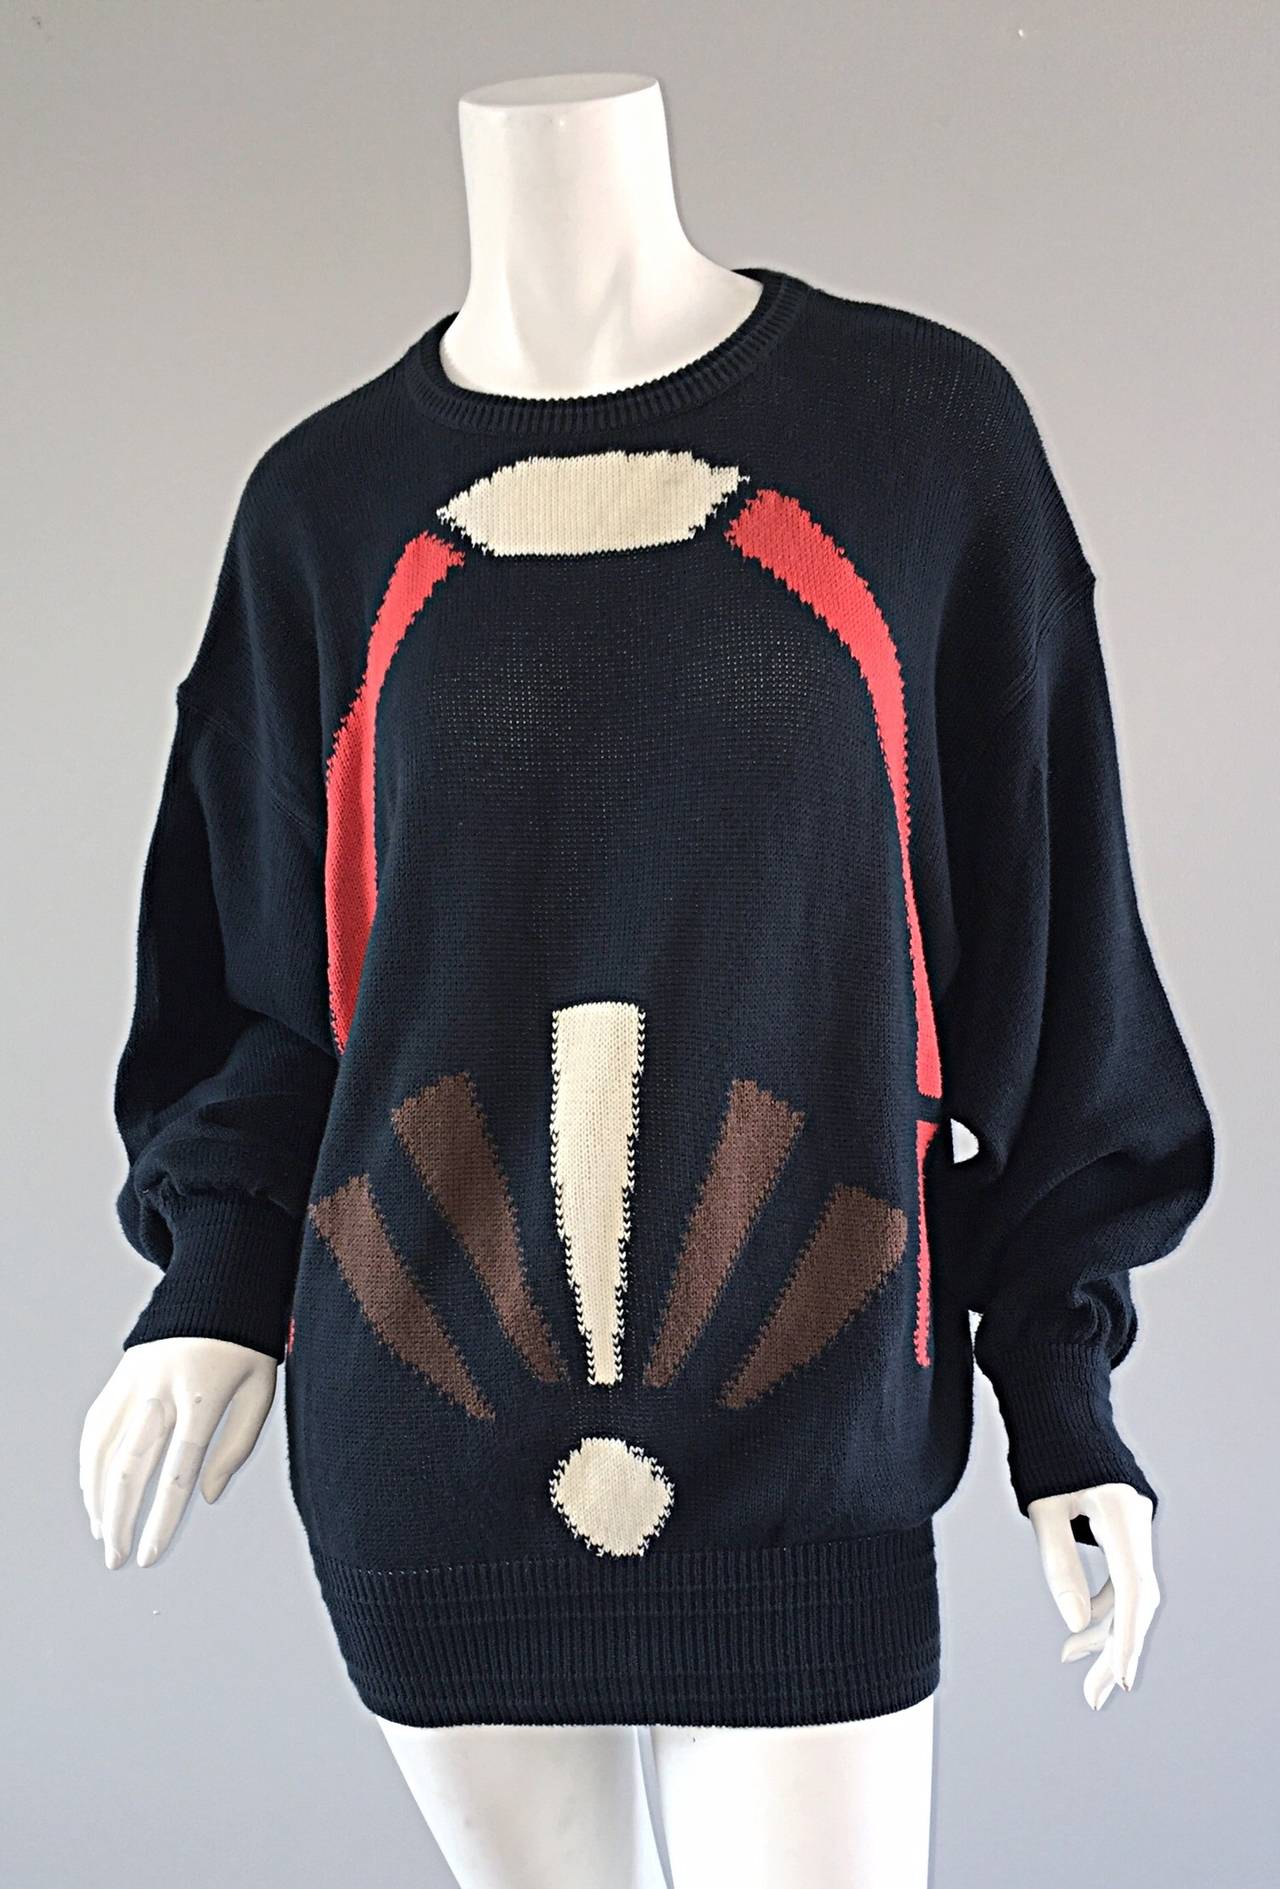 Very Rare Early Gianni Versace Intarsia Navy Blue Vintage 1980s Sweater 3